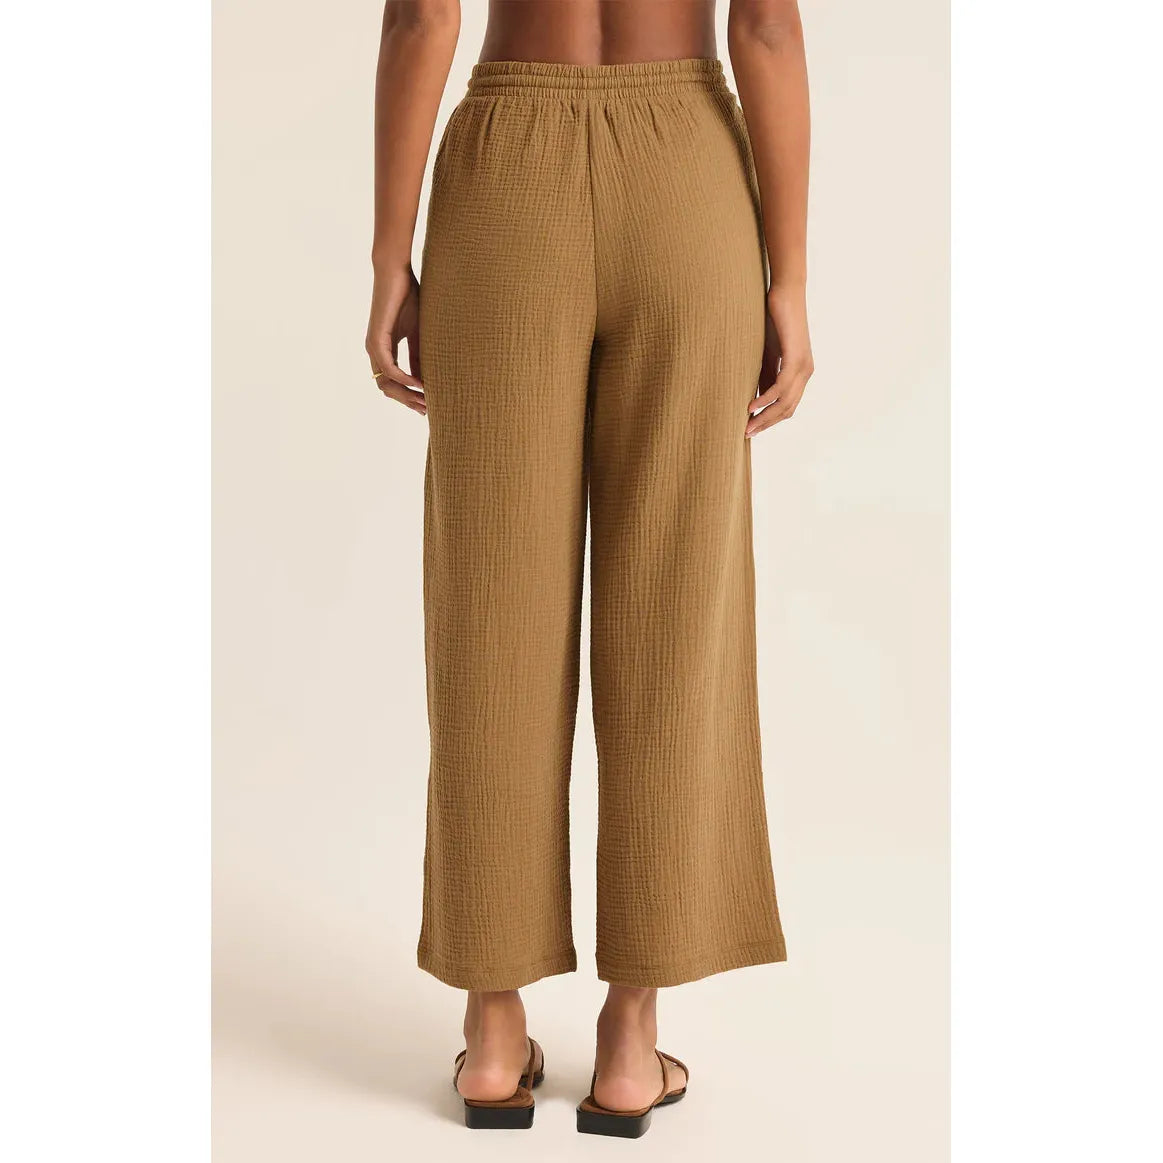 Z Supply - Barbados Gauze Pant in Otter